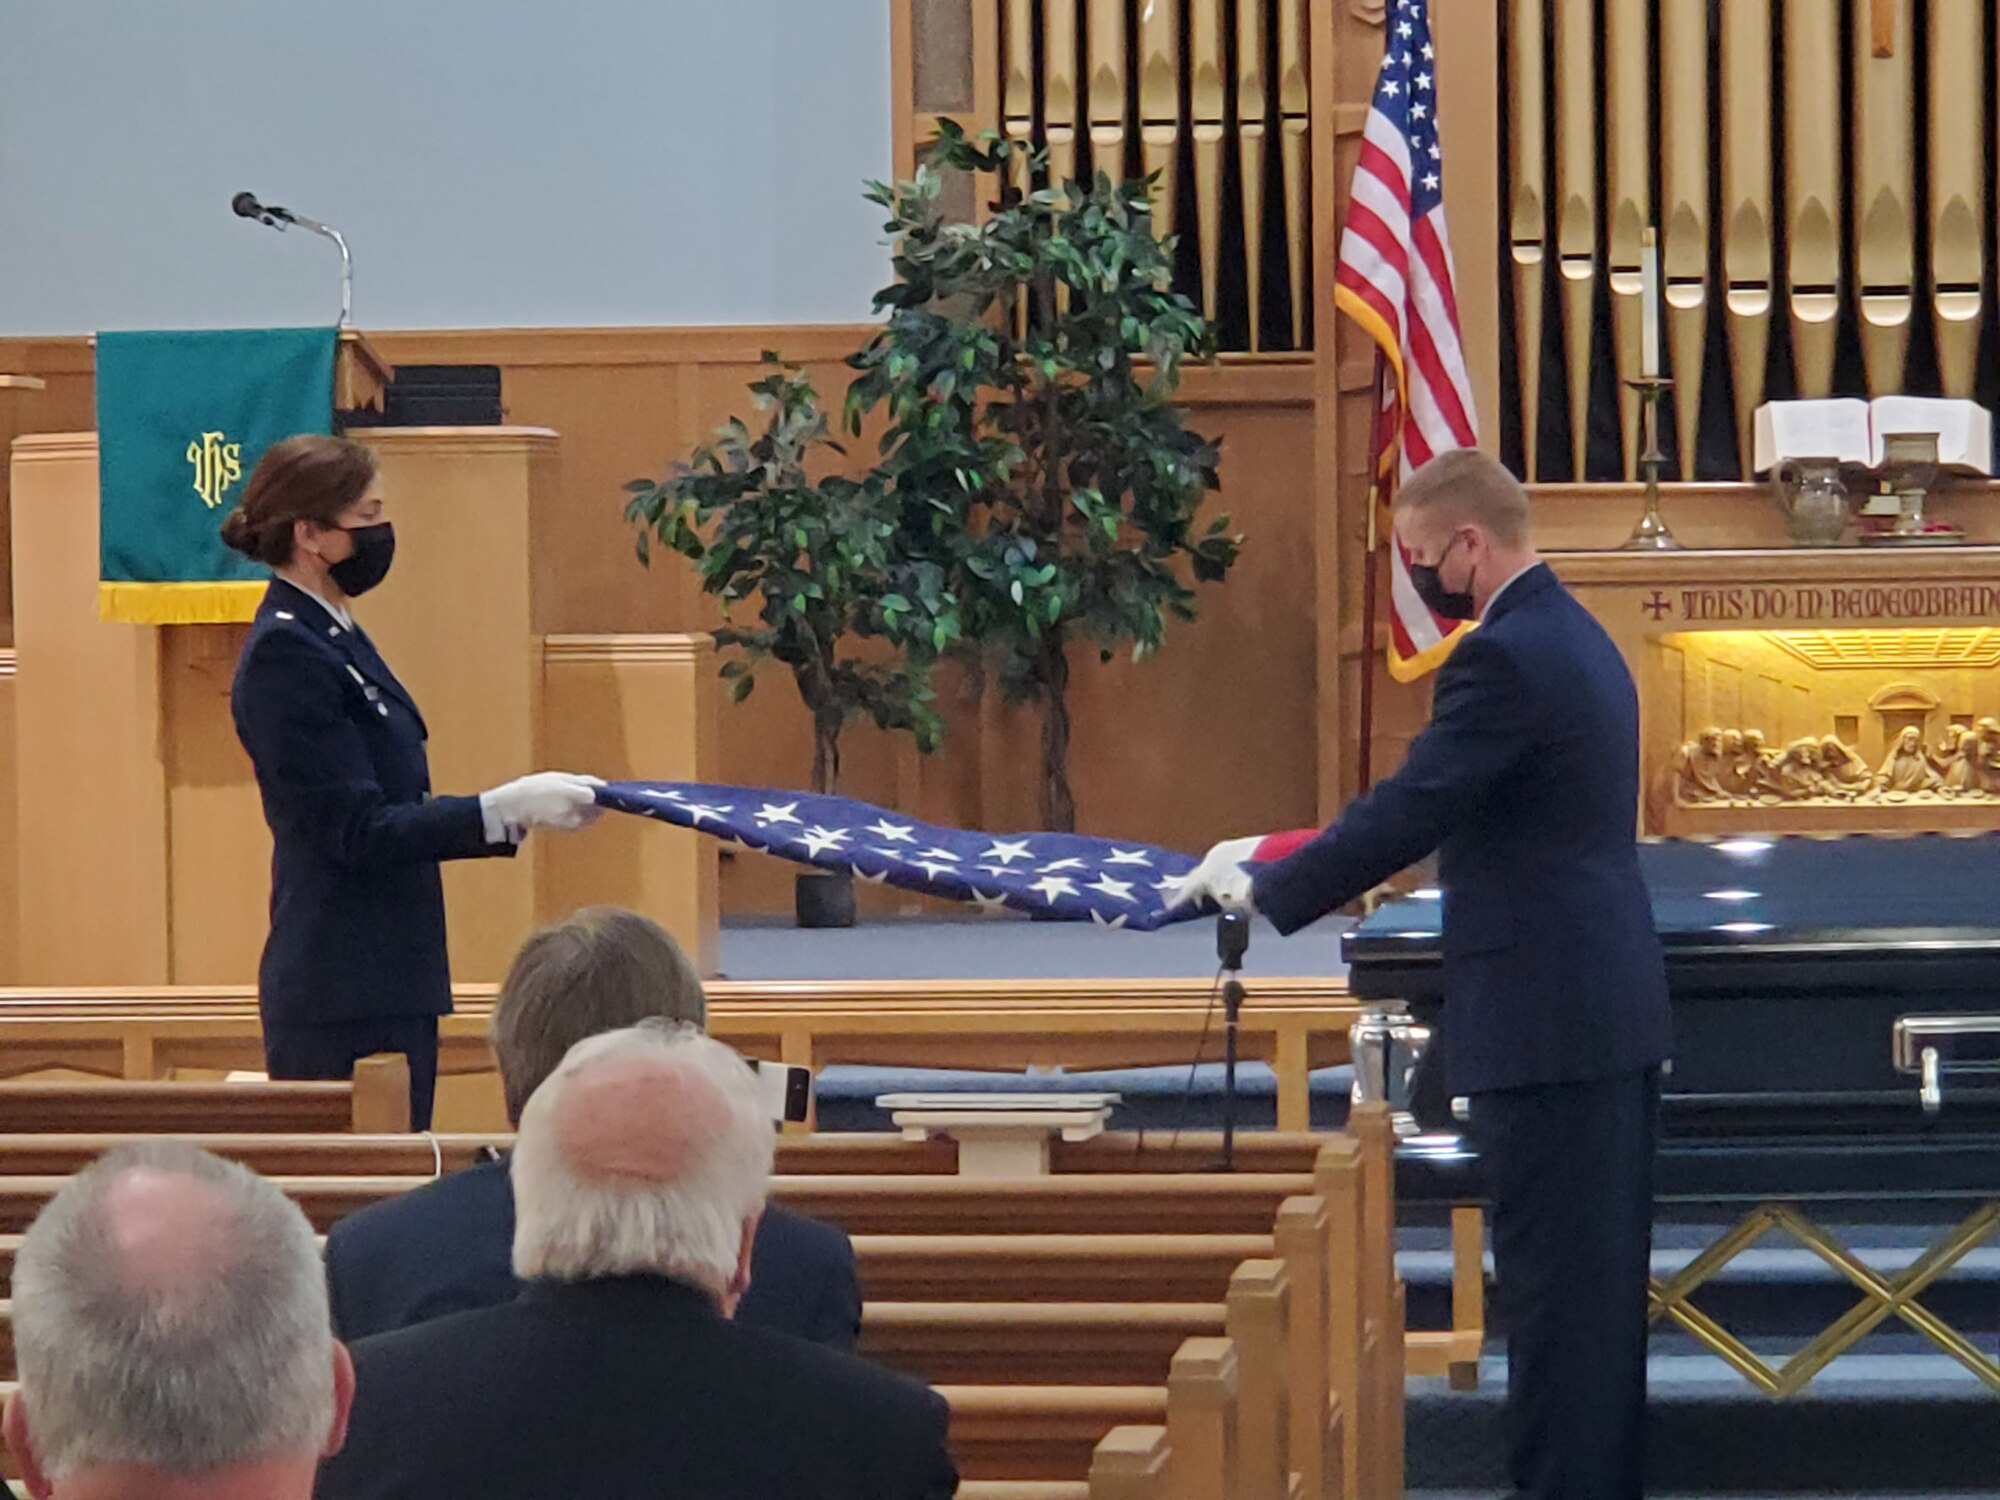 Lt. Col. (retired) Dianne Hickey, former 14th Intelligence Squadron commander, and Maj. Andrew Soine, 14 IS director of operations, fold a flag as part of the military honors conducted during World War II veteran John “Jerry” Johnson’s funeral Oct. 23, 2021. Senior Master Sgt. Jonathon Washington performed Taps during the service. Johnson had served in Guam during World War II with the Army Air Corps in the 20th Air Force 9th Photographic Technical Squadron. His squadron ultimately became the 14 IS.